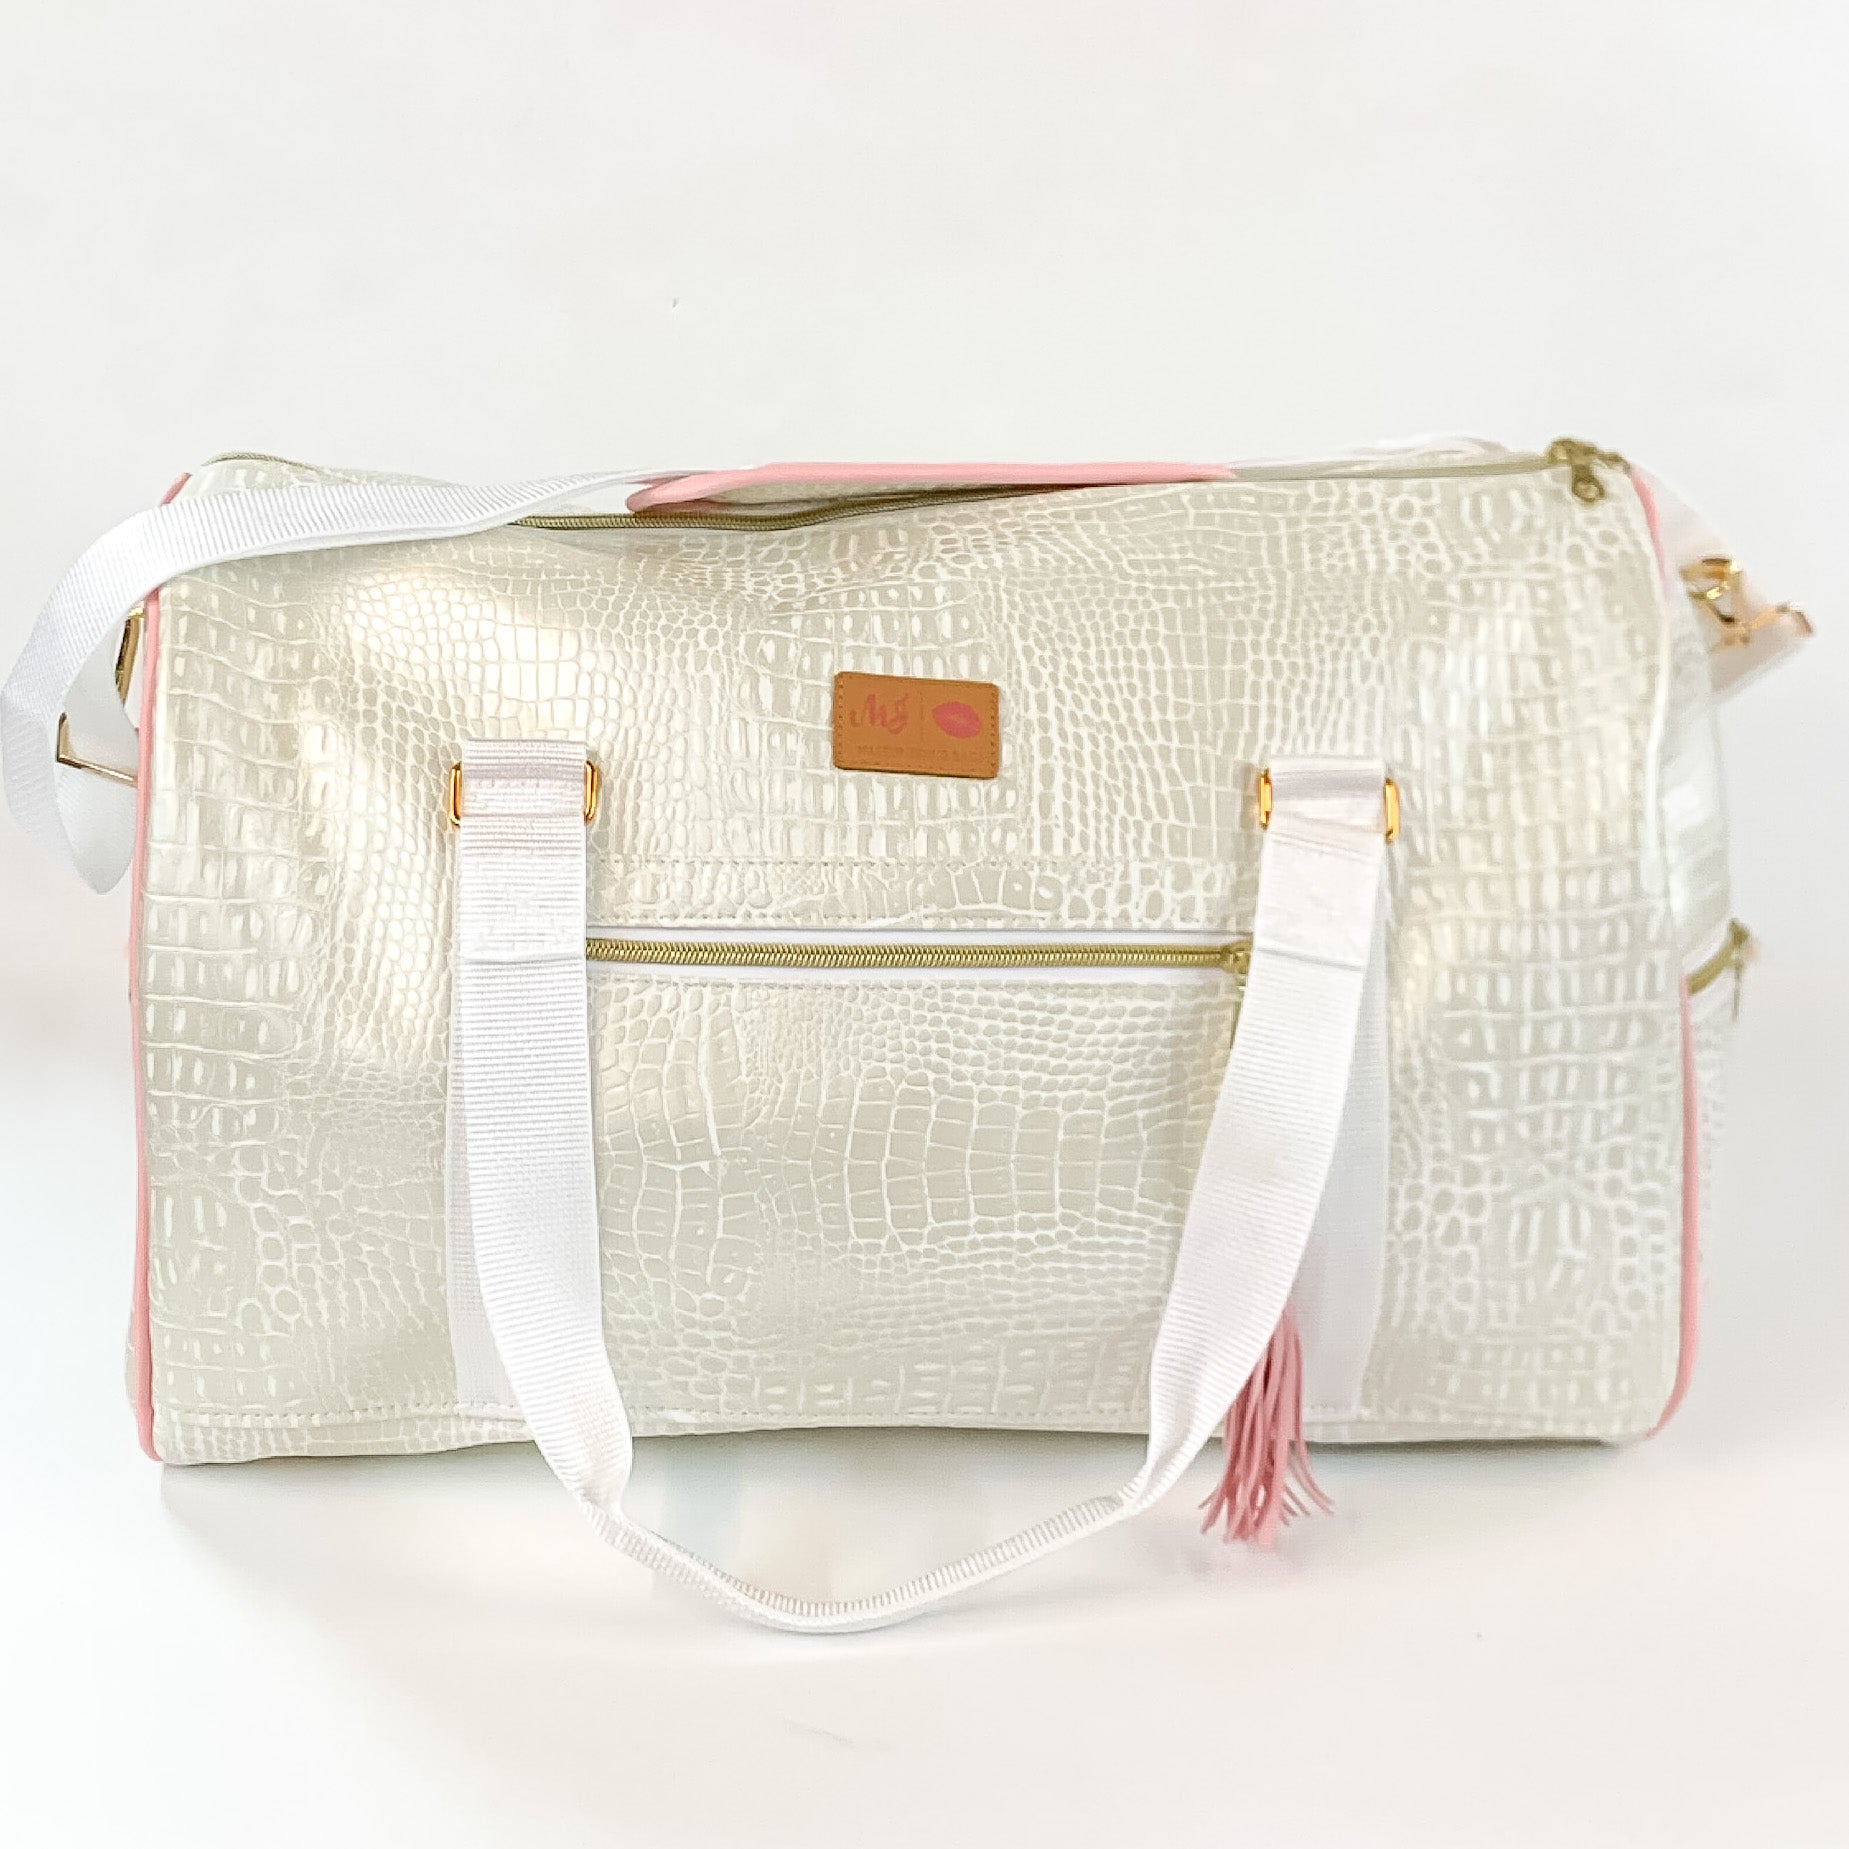 Pictured on a white background is a duffel bag with white straps in a pearl white gator print. This bag includes a zipper tassel, two short white straps, and a long white strap.